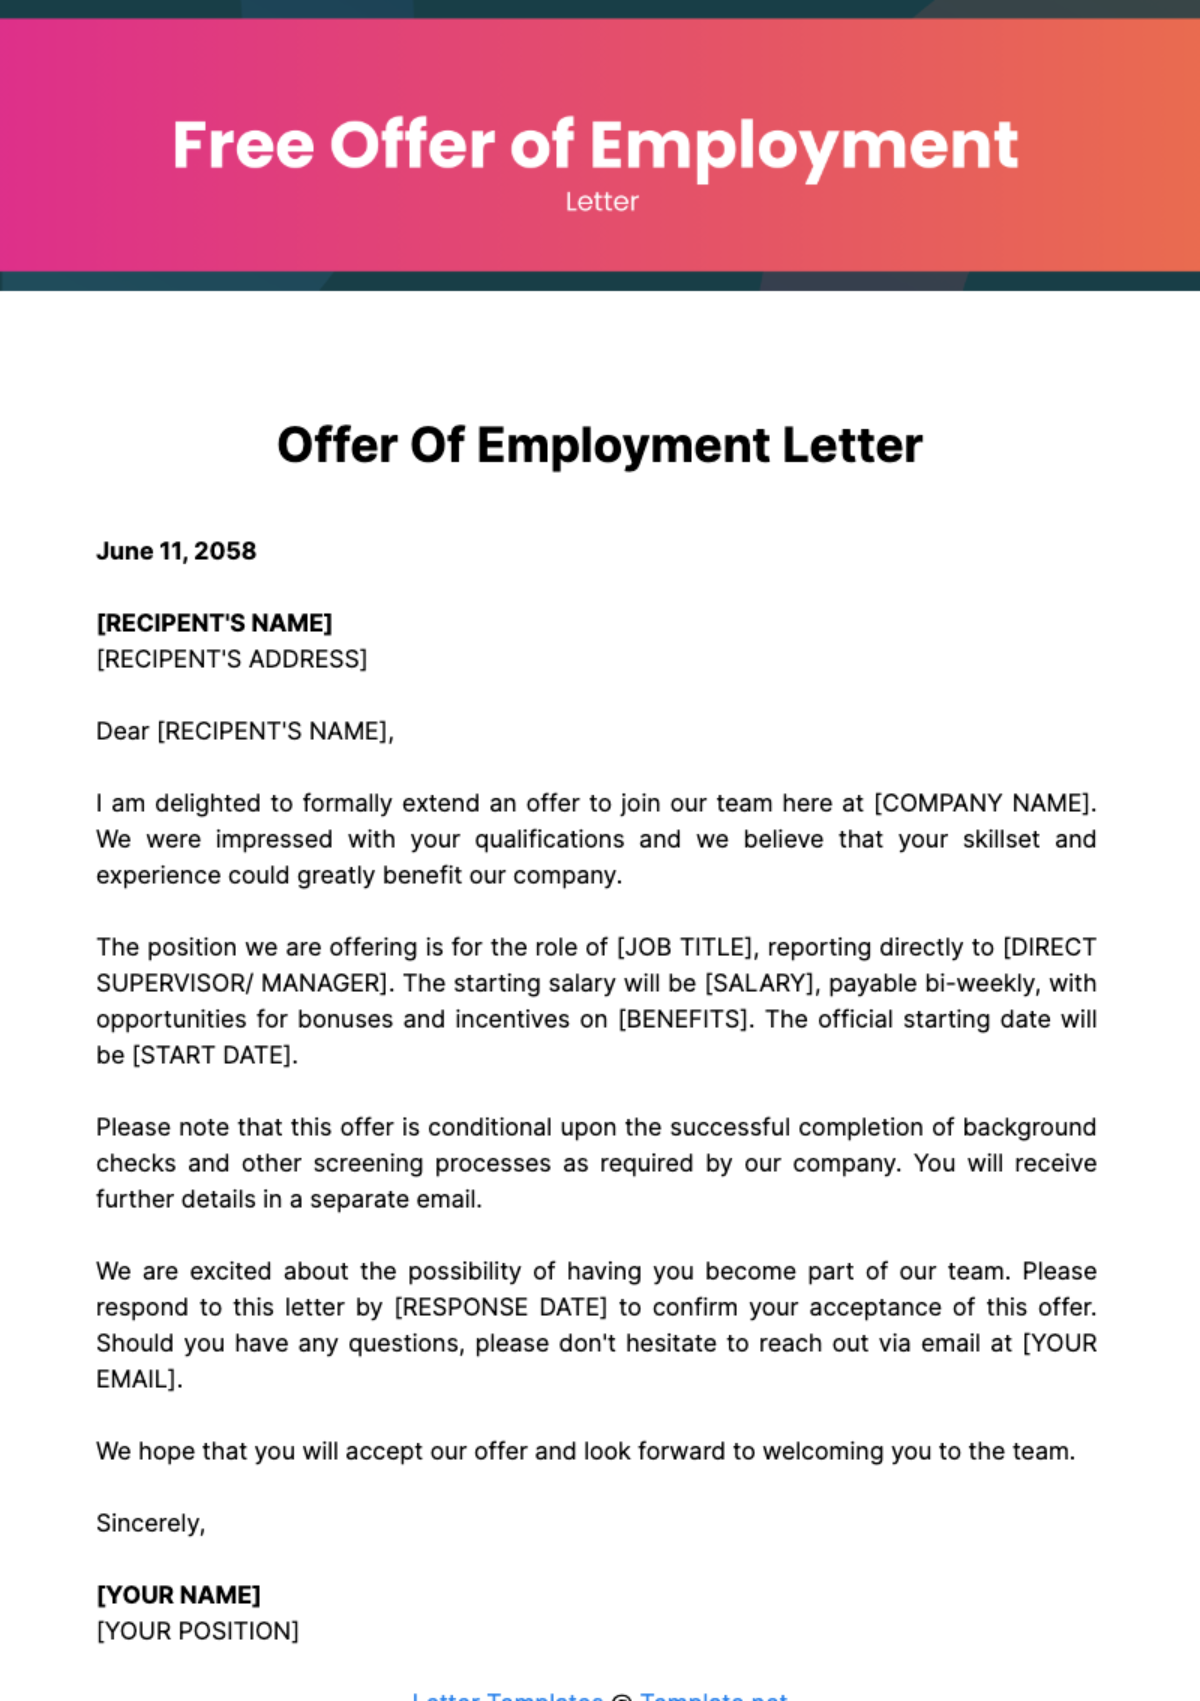 Free Offer of Employment Letter Template